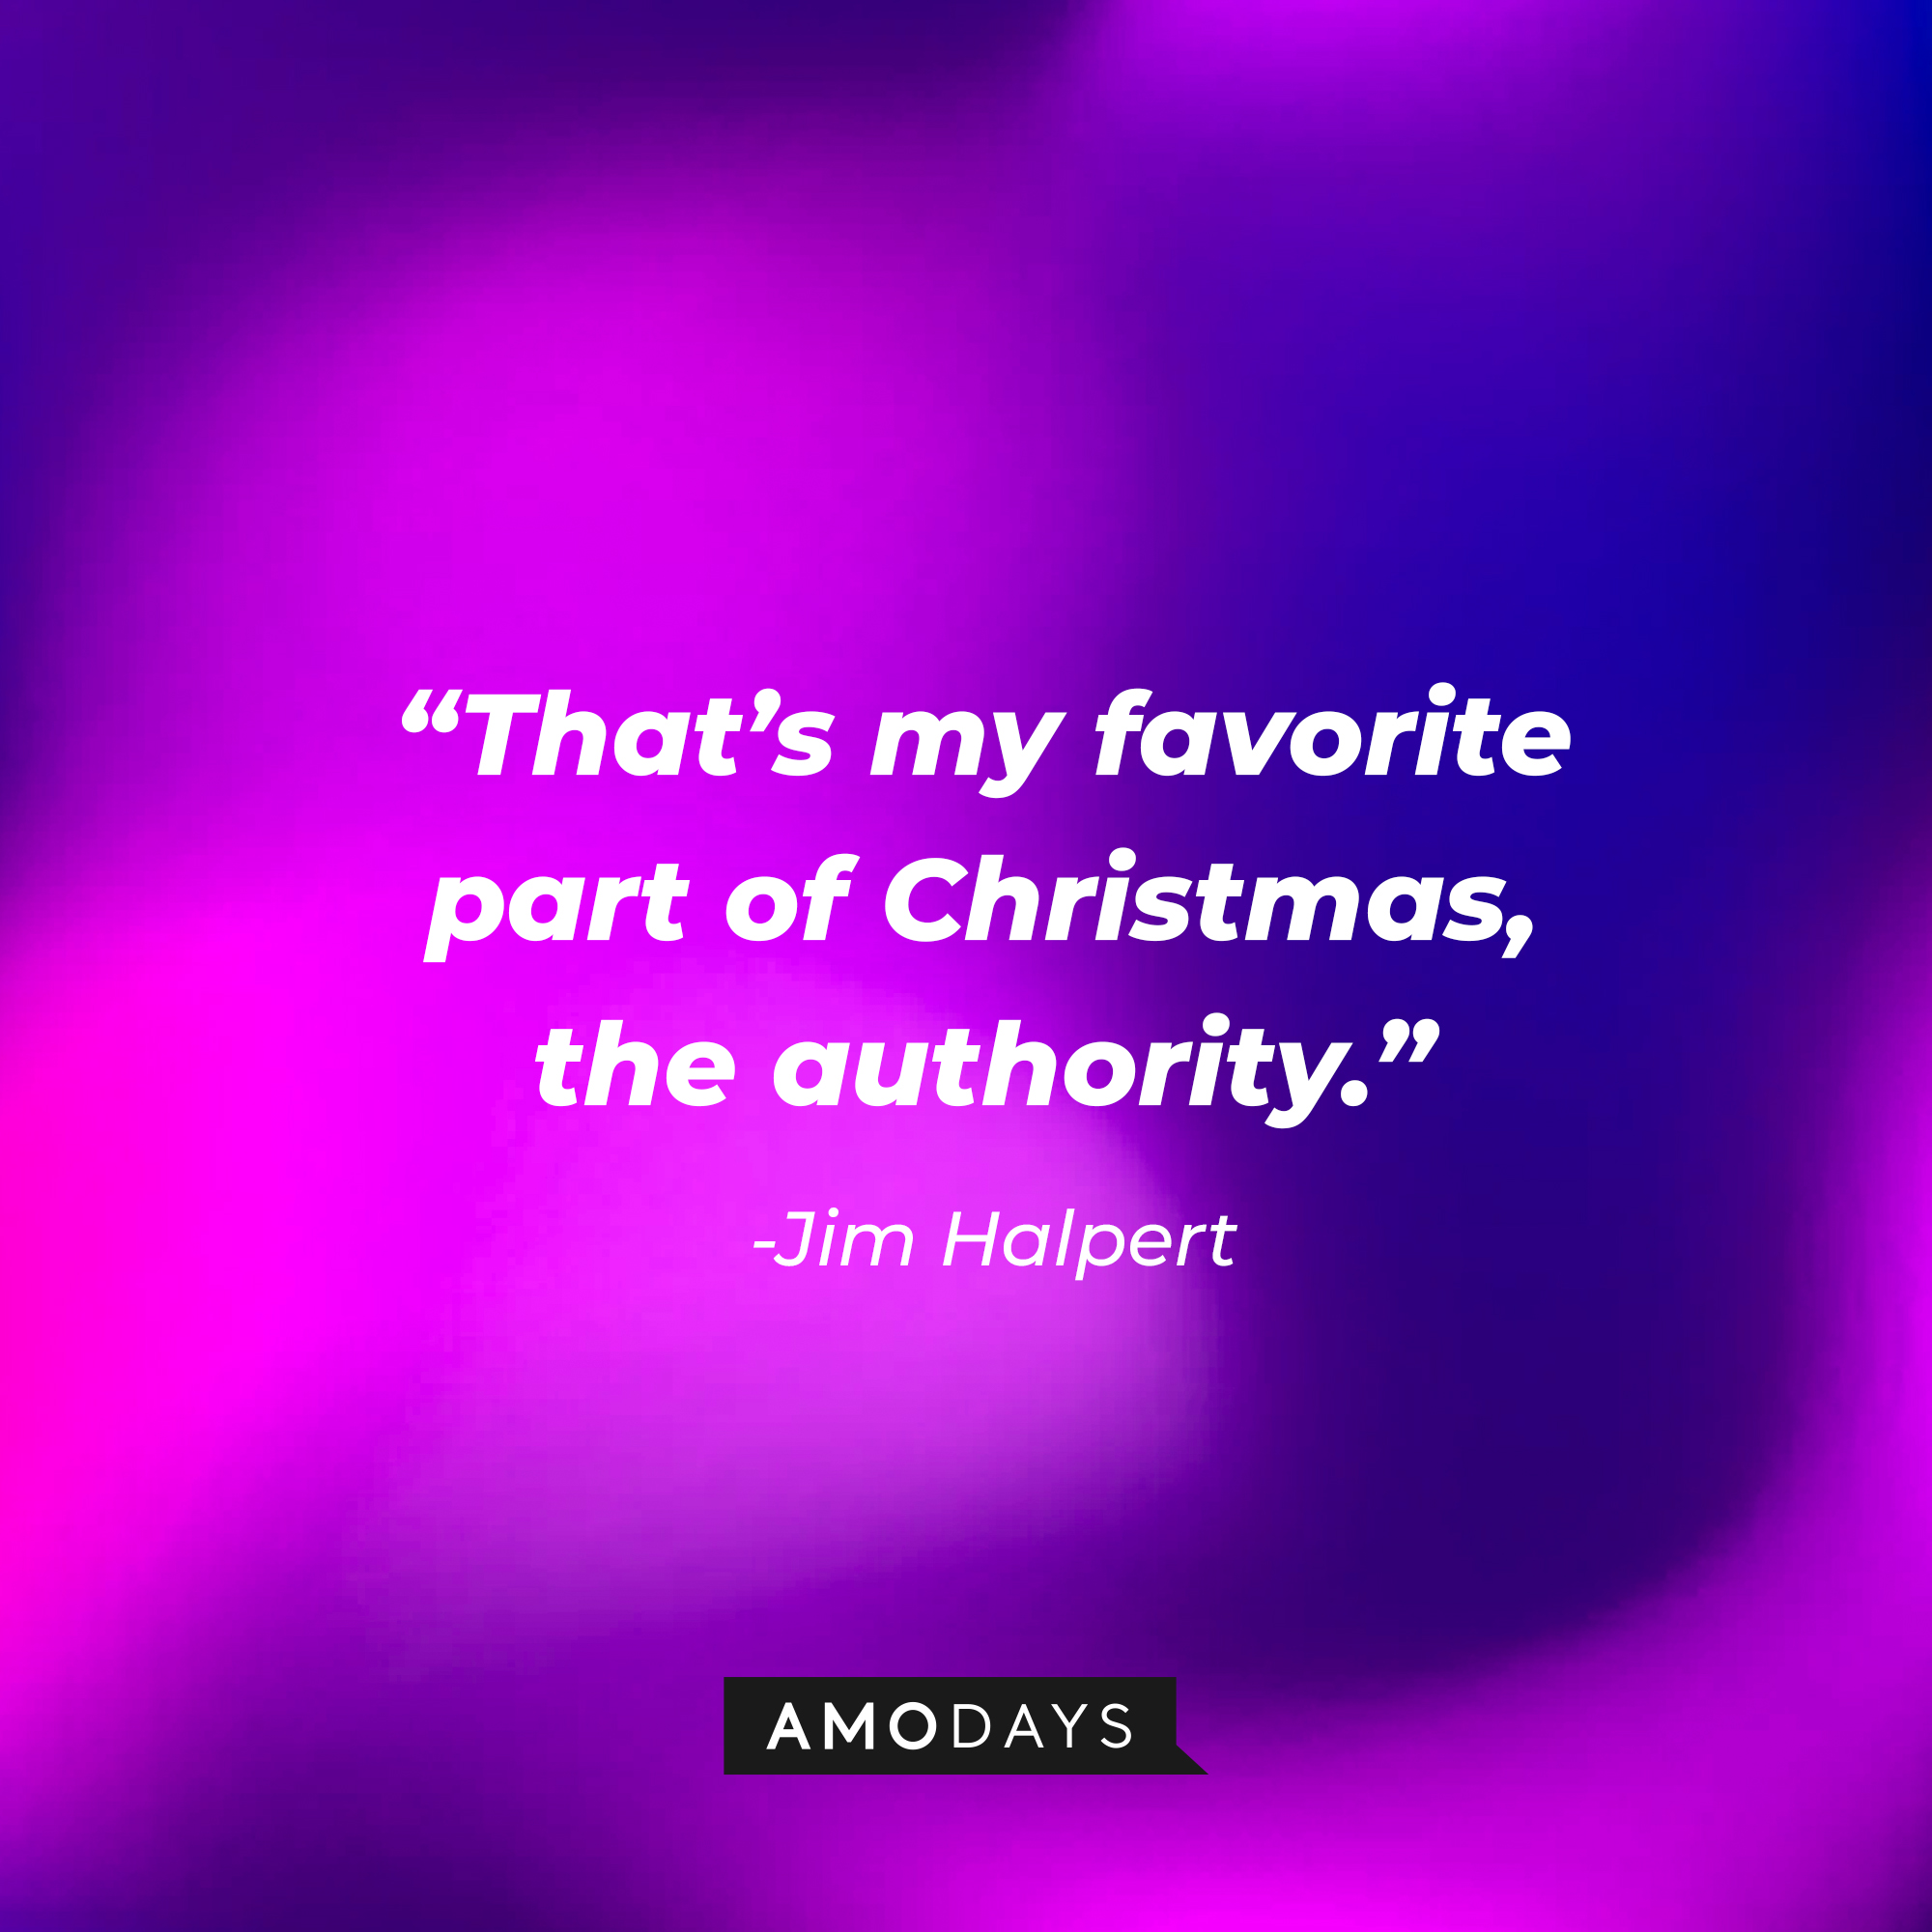 Jim Halpert’s quote: “That’s my favorite part of Christmas, the authority.” | Source: AmoDays